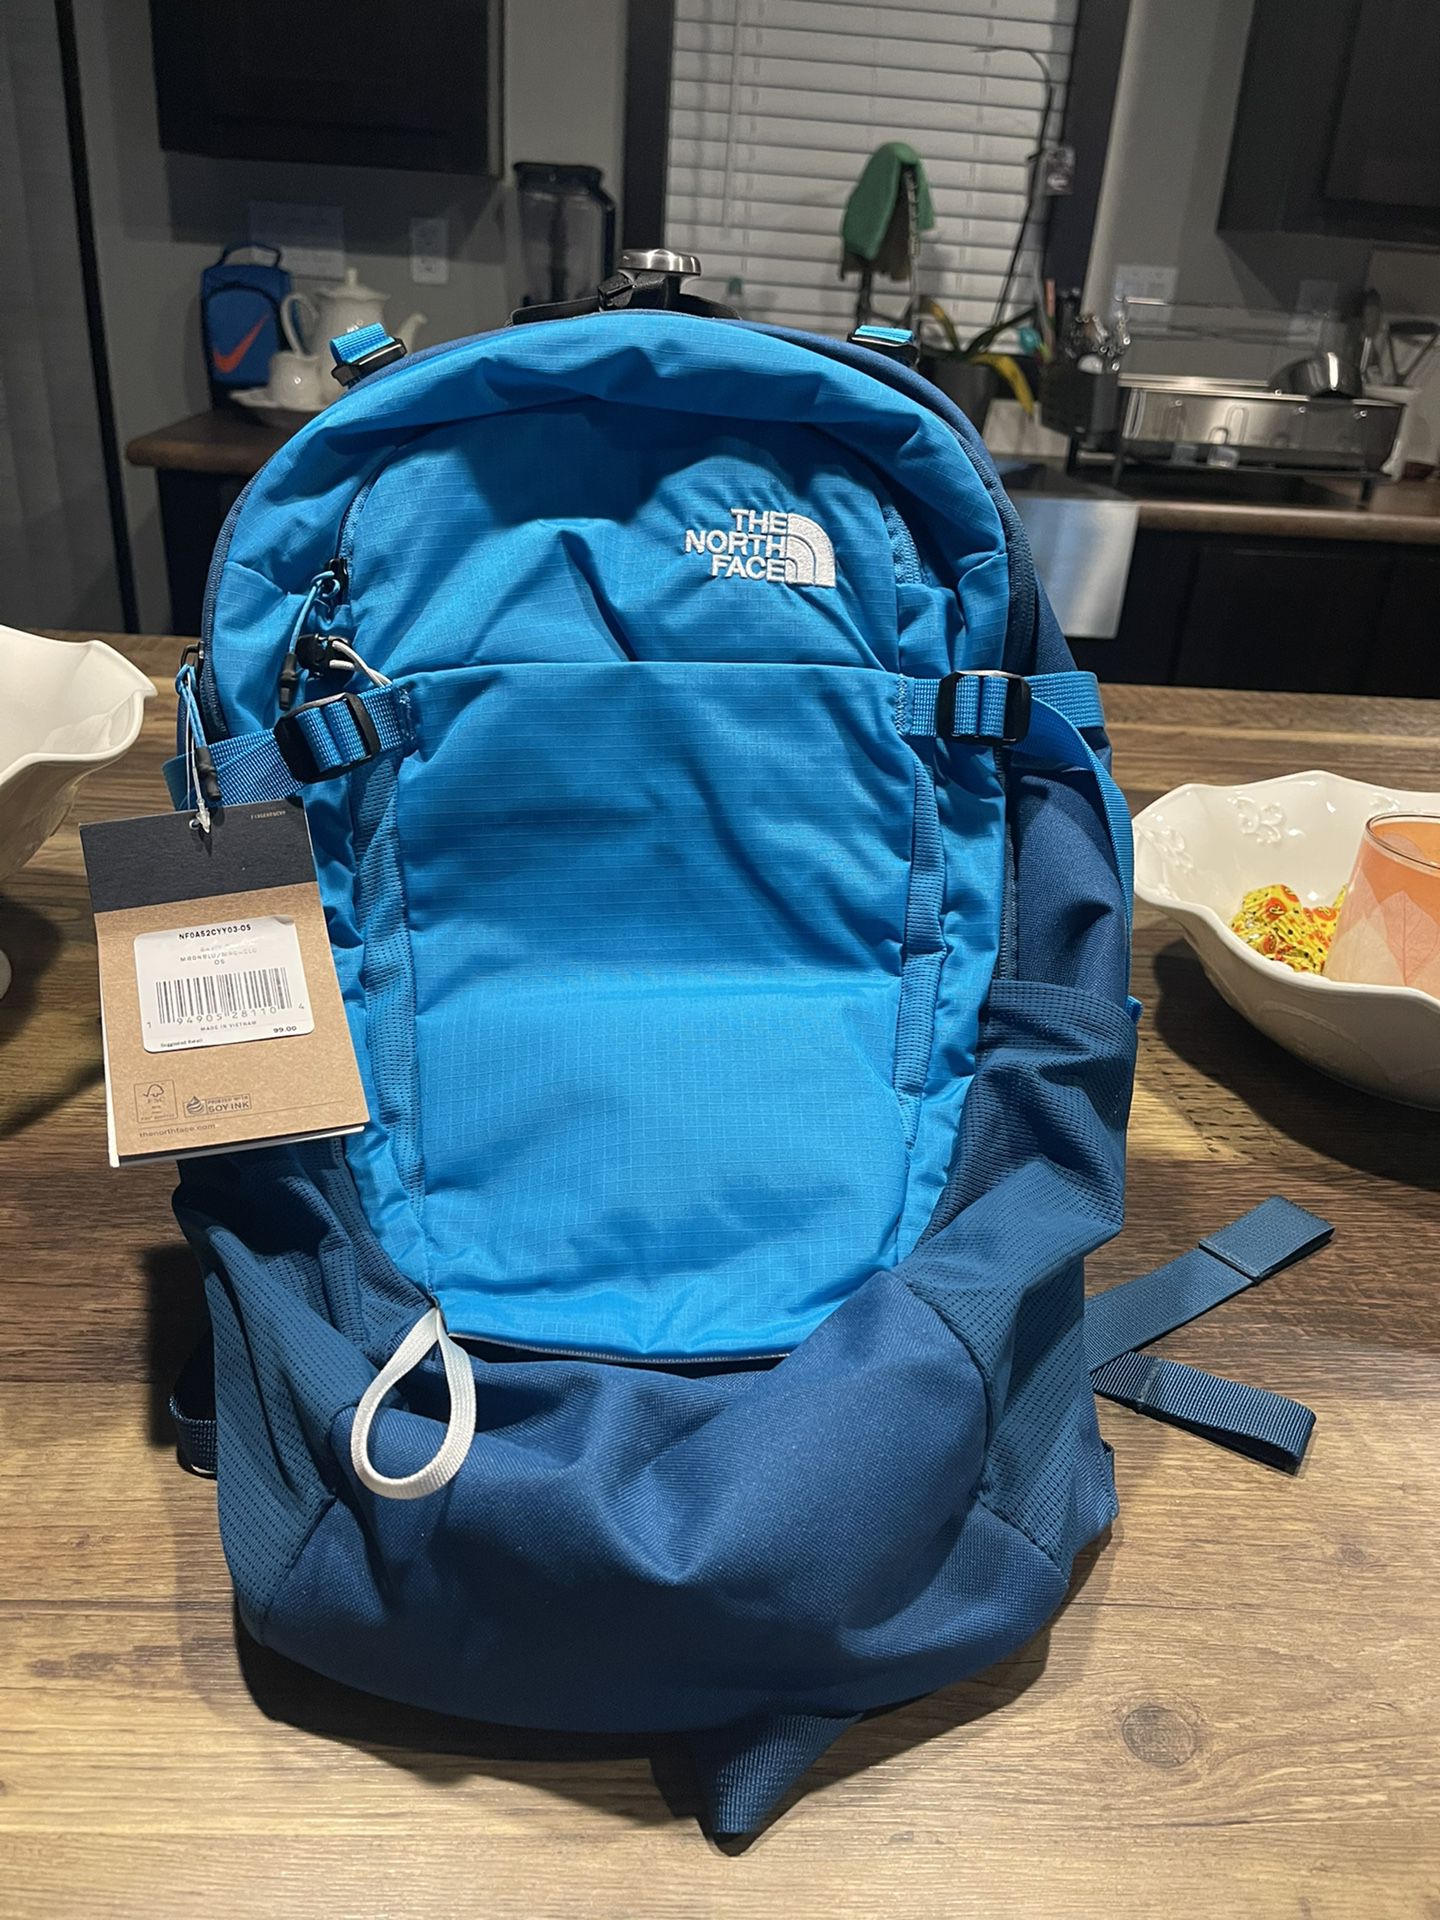 North Face Backpack Brand New !! 